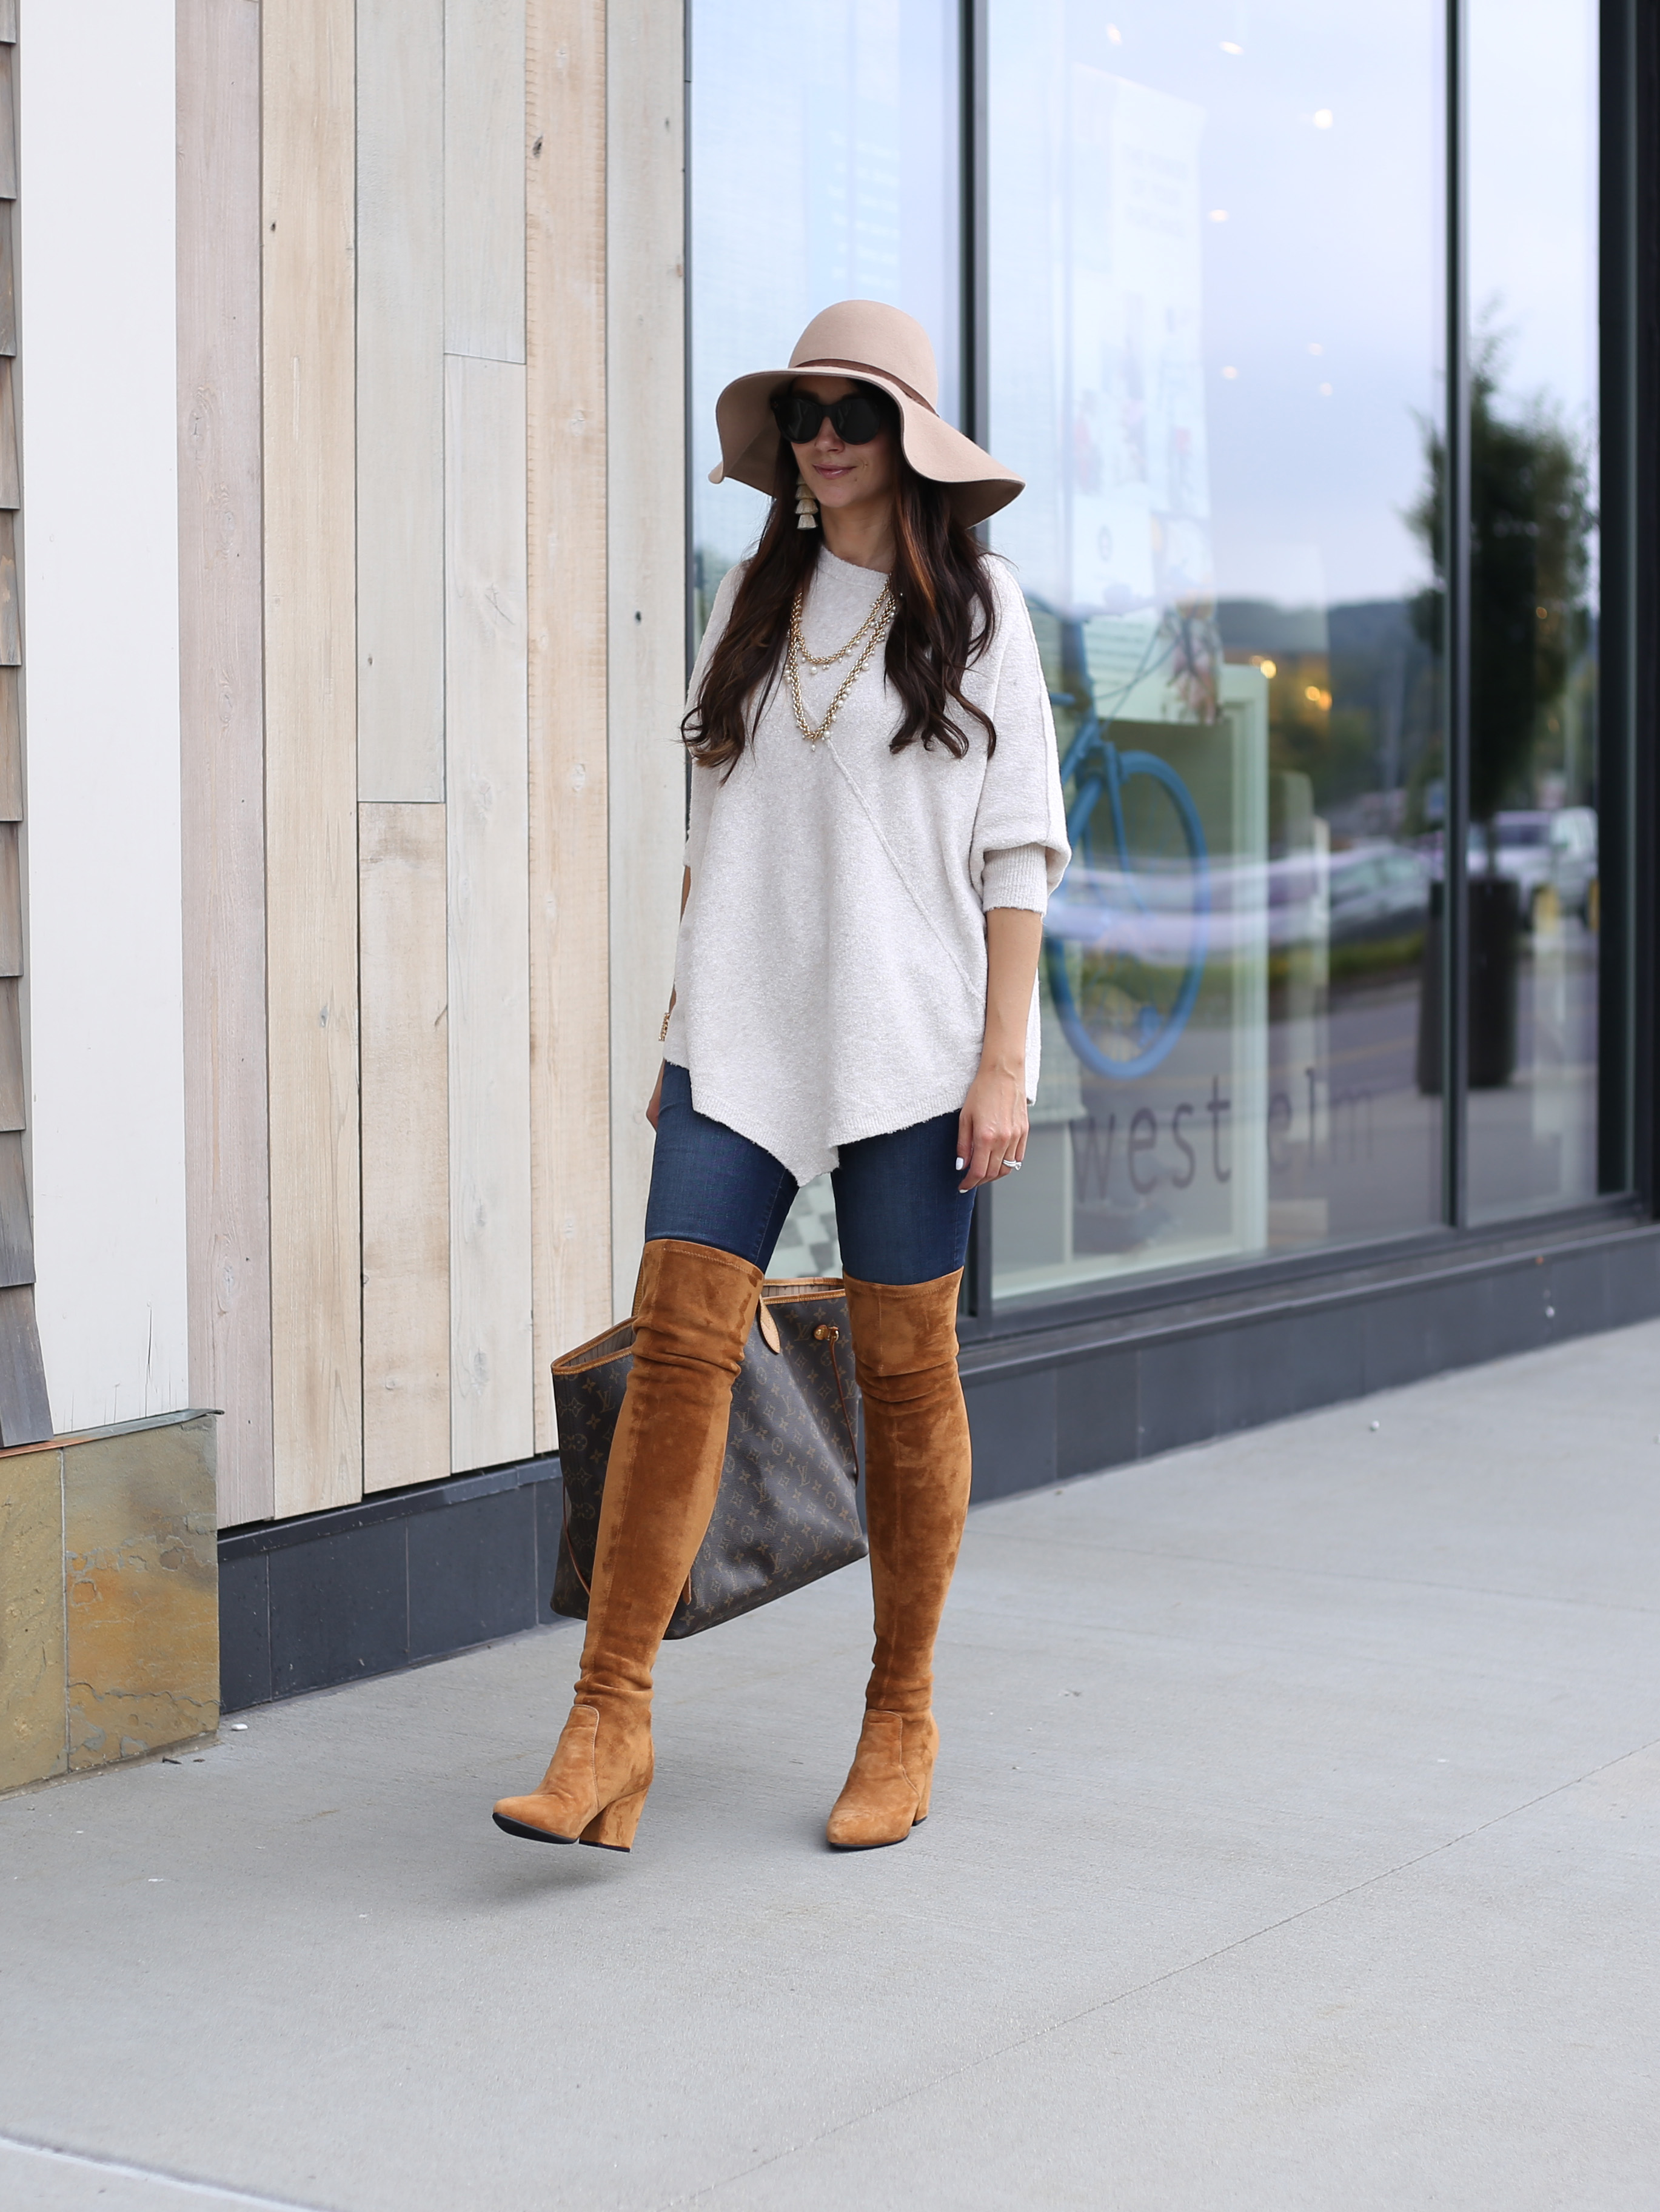 blogger Anna Monteiro wearing Poncho for Fall and over the knee boots